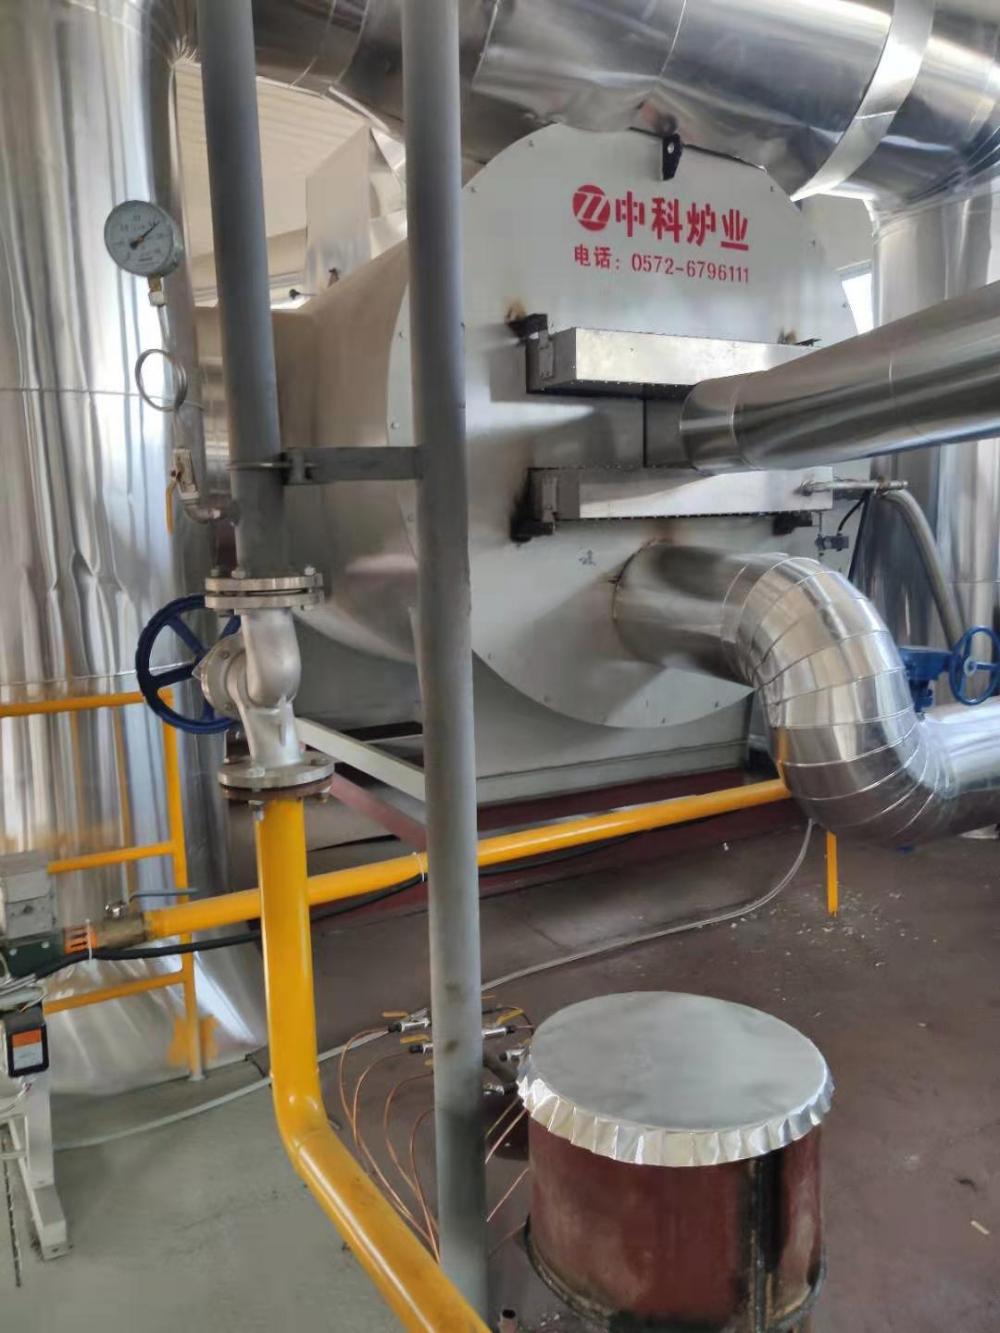 China Offer Drying Furnace Manufacturers